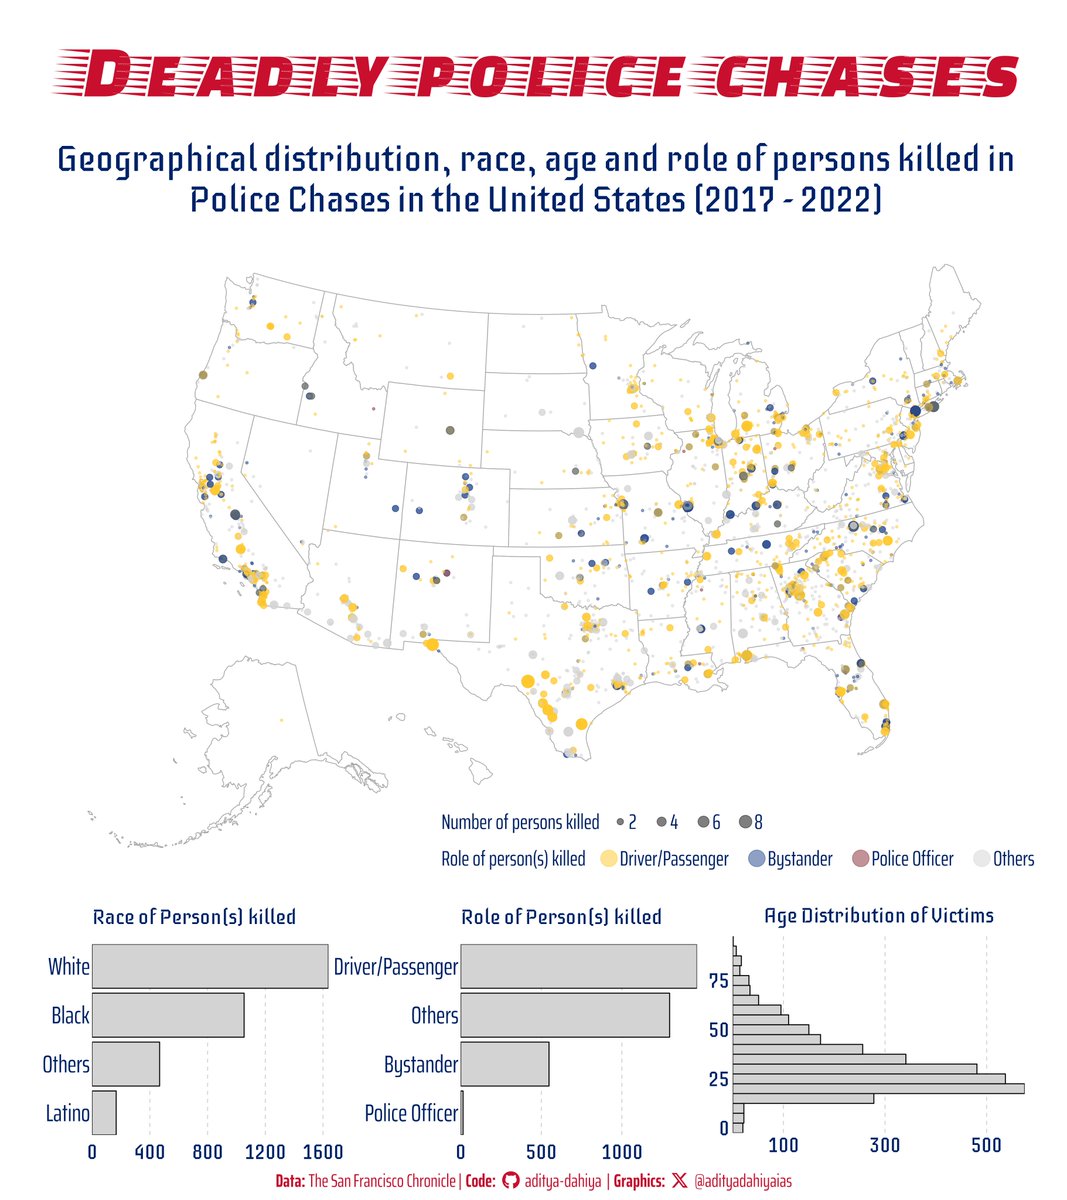 #dataviz Deadly police chases in the USA. Most people killed are young, and most deaths occur around major cities. Many victims are bystanders! Data: @sfchronicle @susieneilson @jennifergollan & @NHTSAgov Code🔗tinyurl.com/fpc-dip Tools #ggplot2 #patchwork #usmap